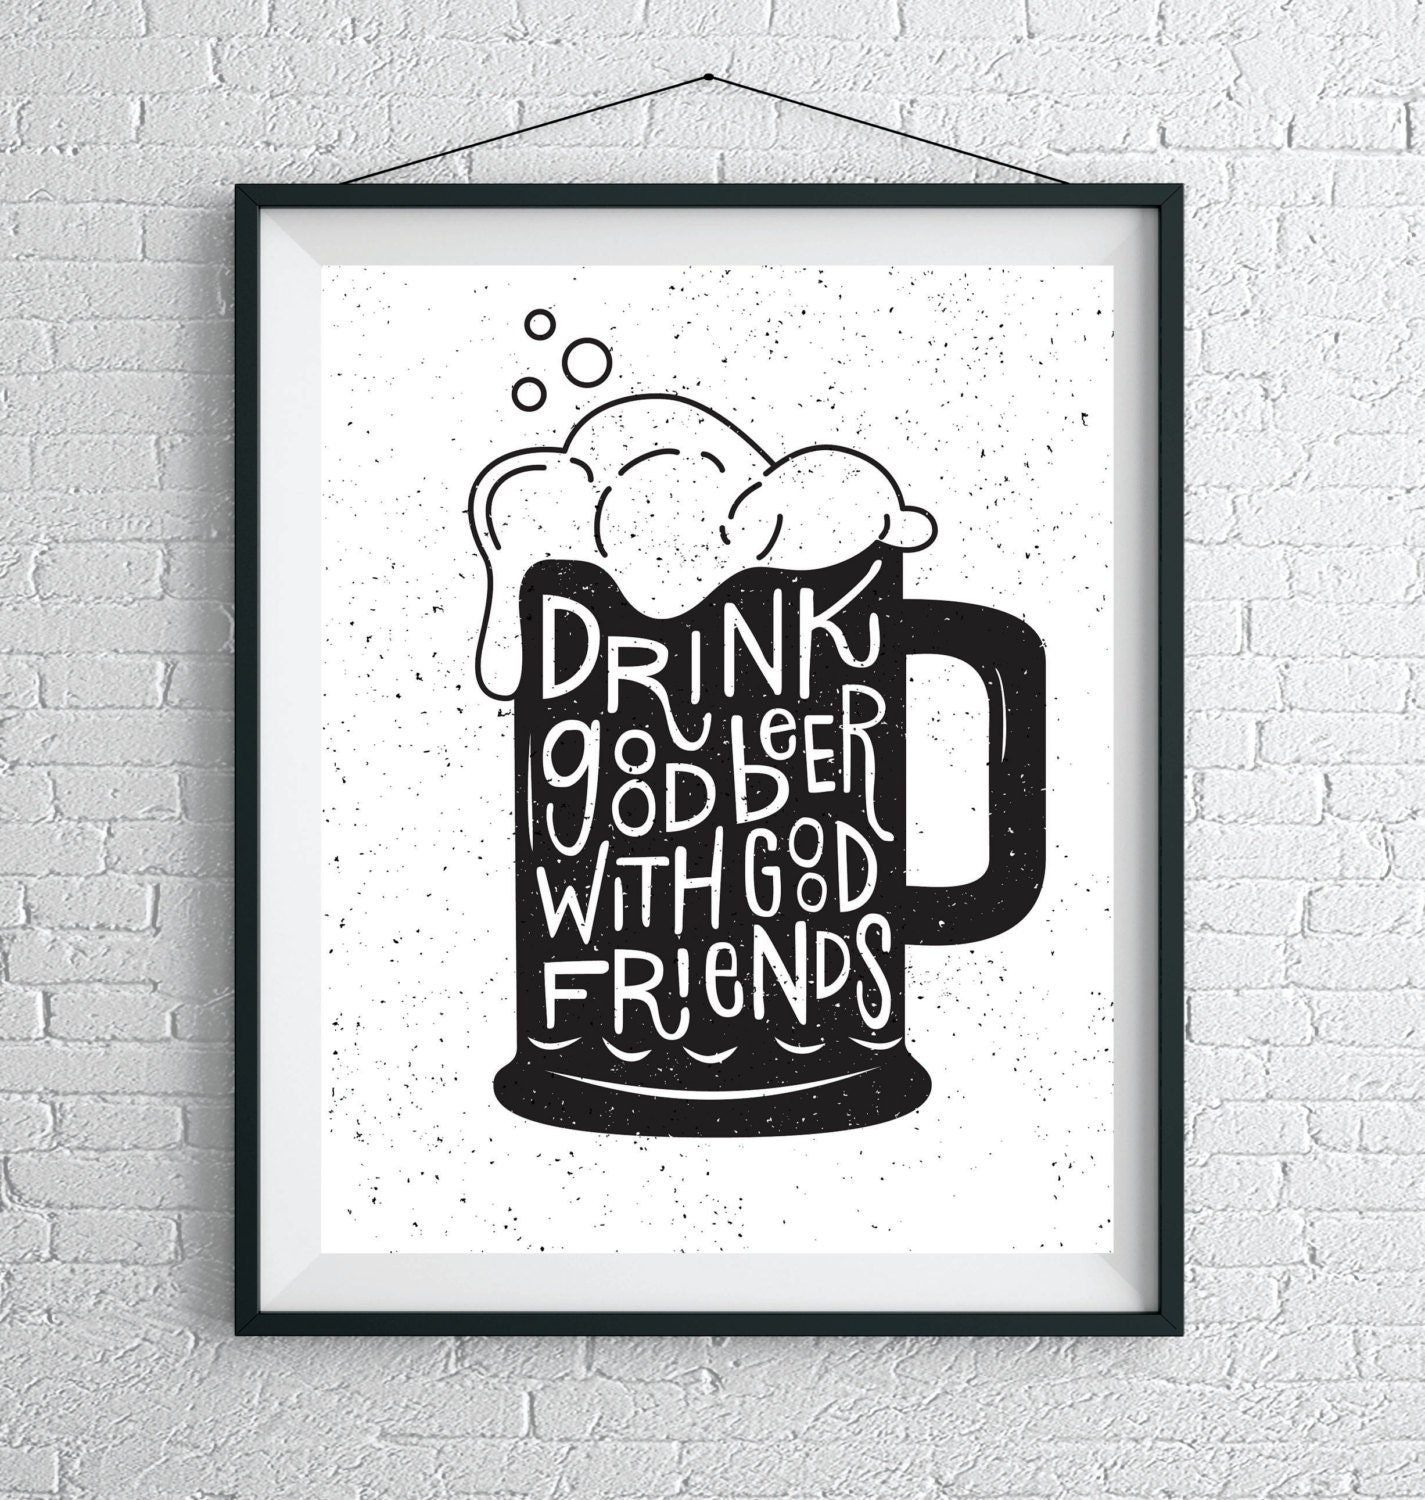 Download Drink Good Beer With Good Friends Print / Friends Quote / Beer